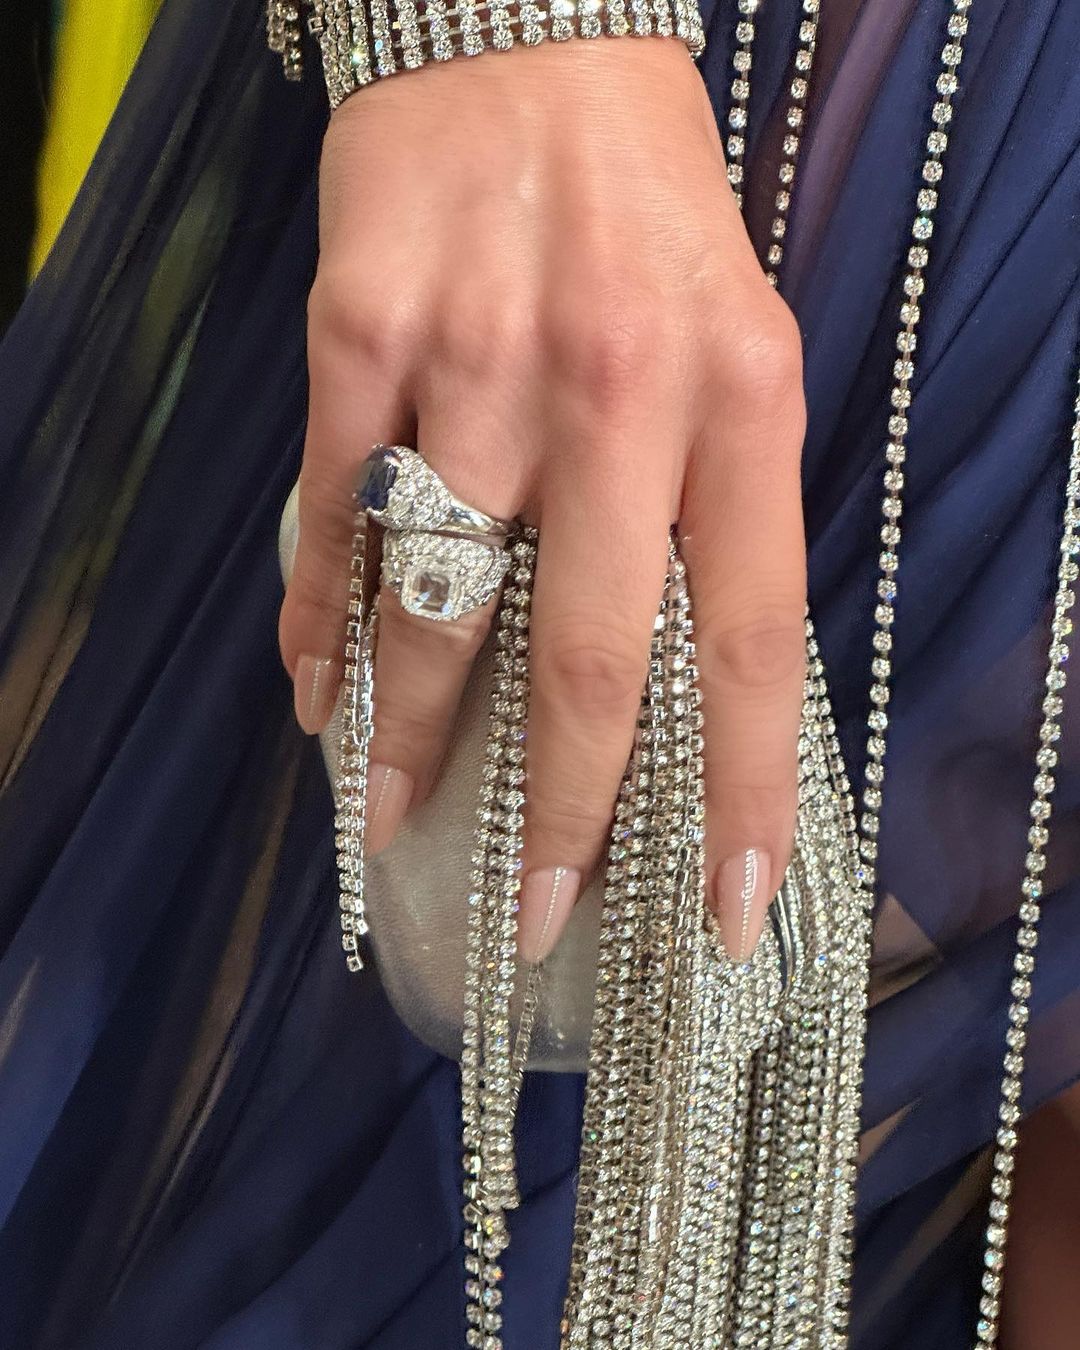 Taylor Swift Wore $3 Million Jewelry to the Grammys